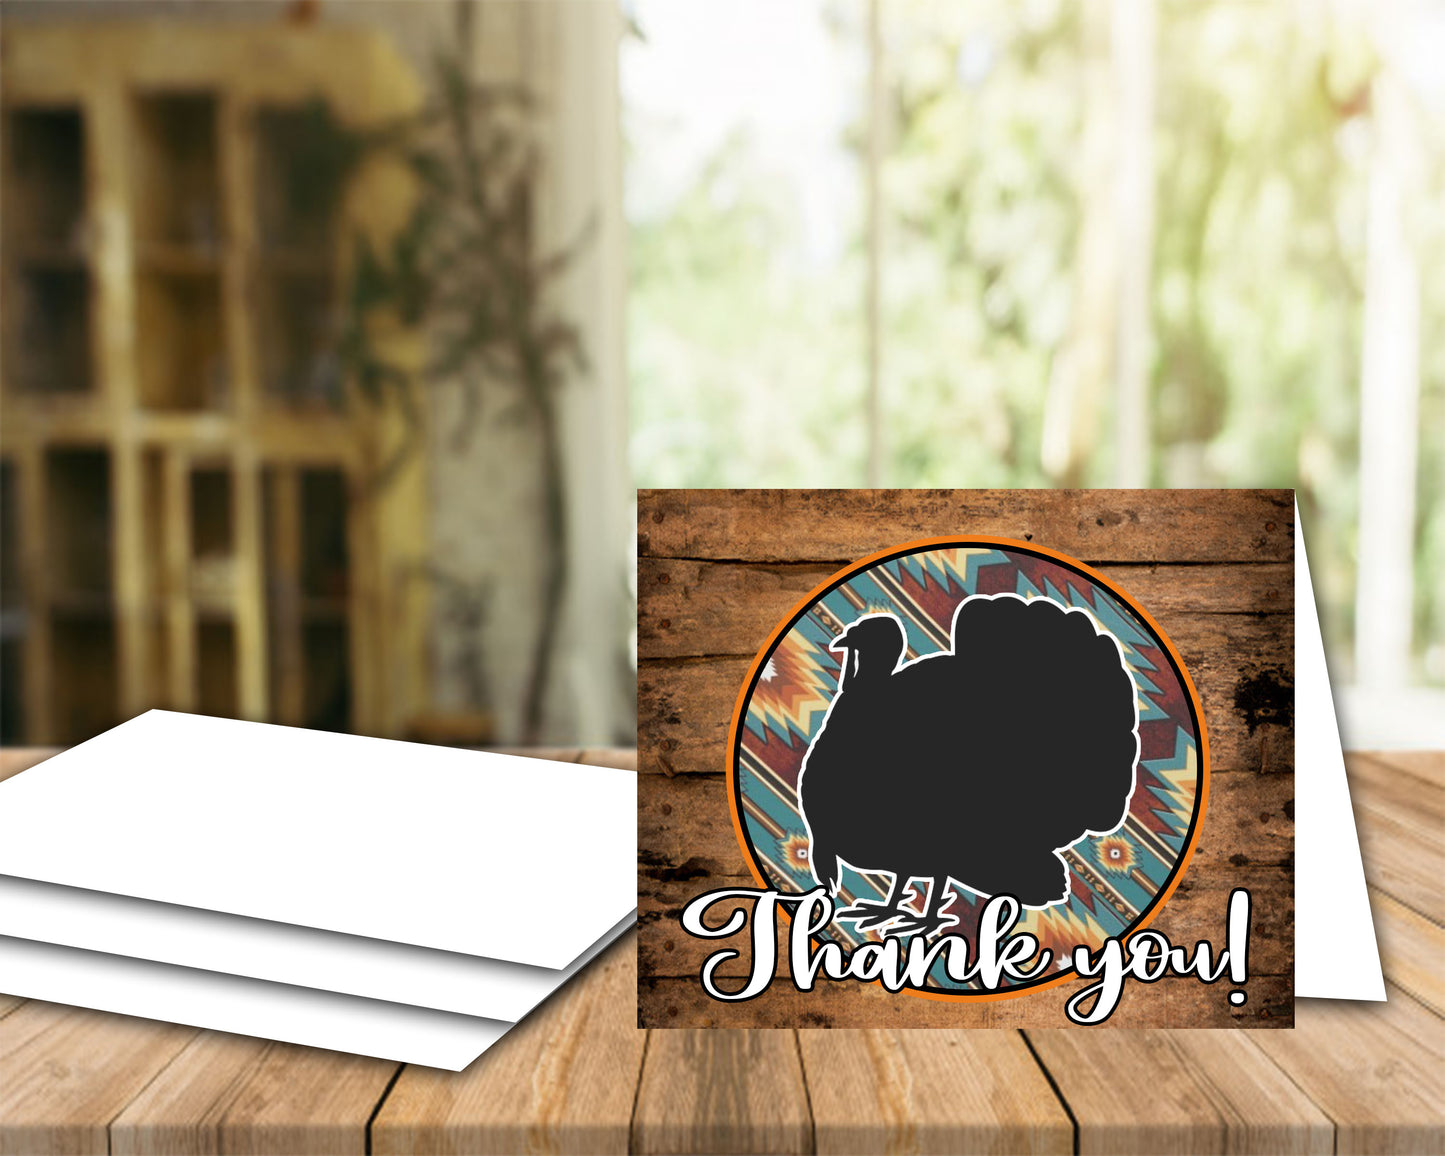 Livestock Show Turkey 4H- Thank You Printable Card - 5 x 7" Envelope Template - Brown Wood Background - Poultry Digital Cards